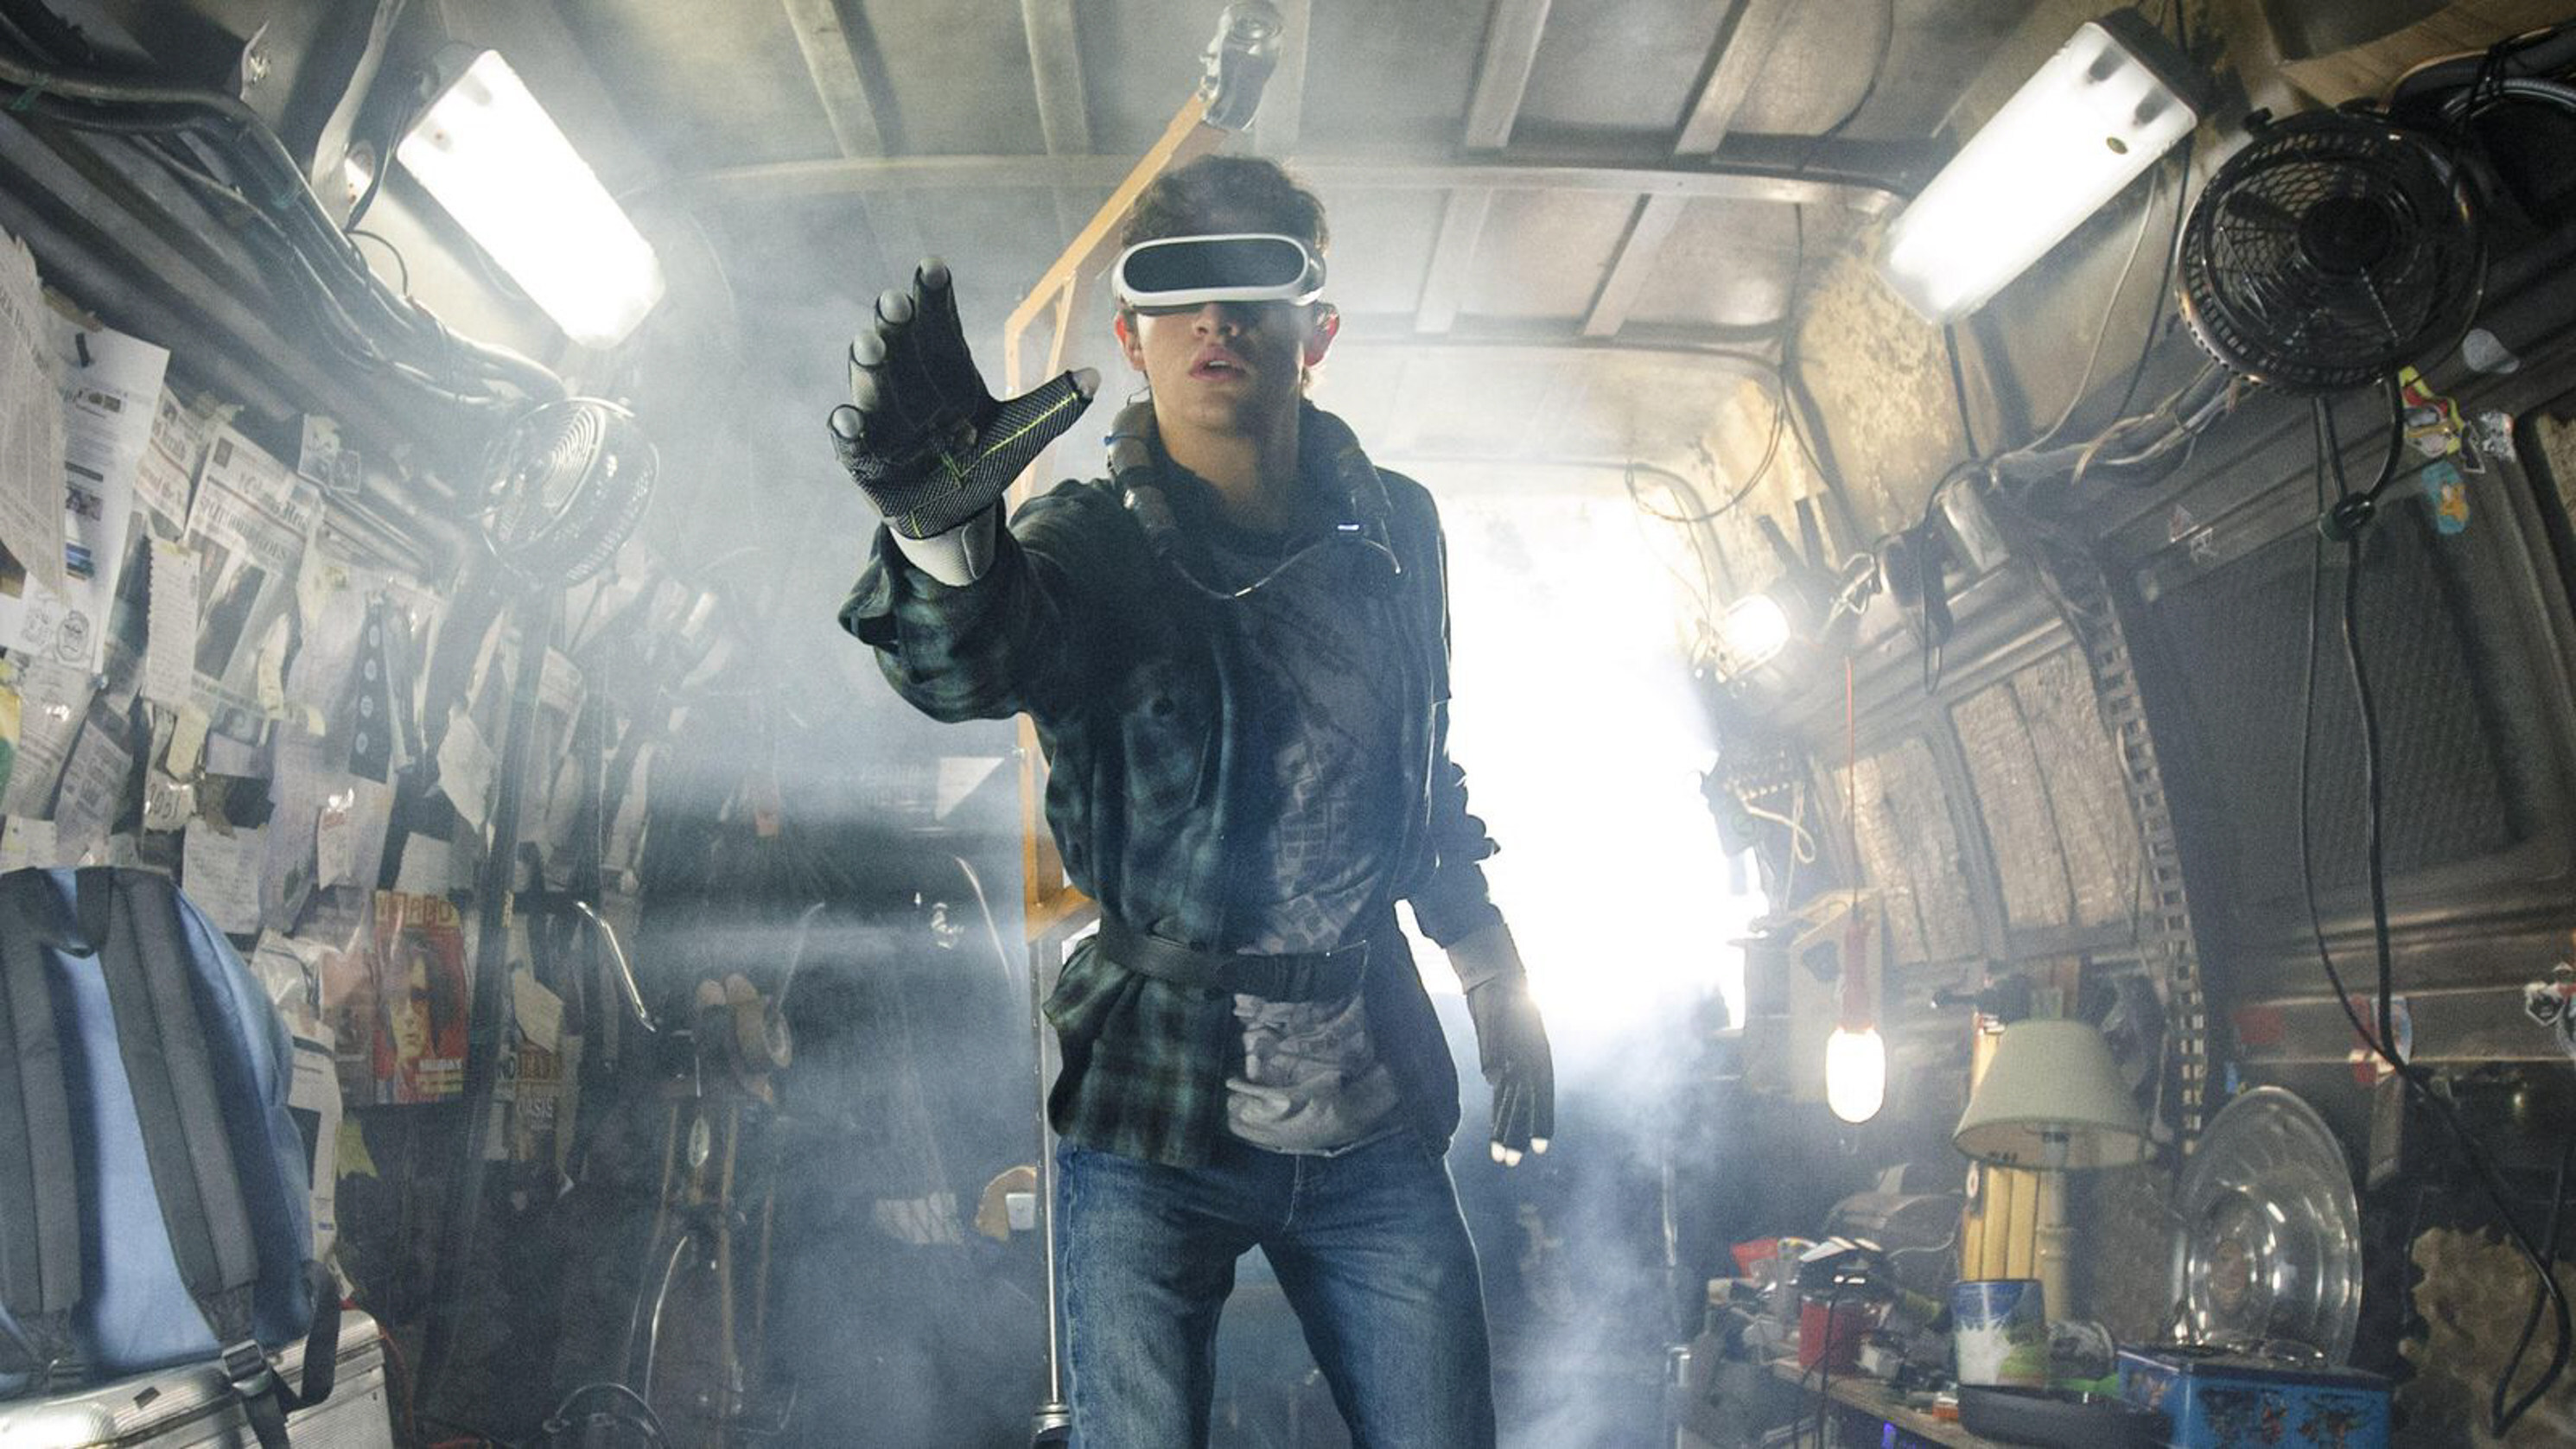 A still from Ready Player One, a film in which the metaverse plays a huge role. The need to keep online environments safe has become ever more urgent as the metaverse becomes more popular. Photo: Warner Bros.